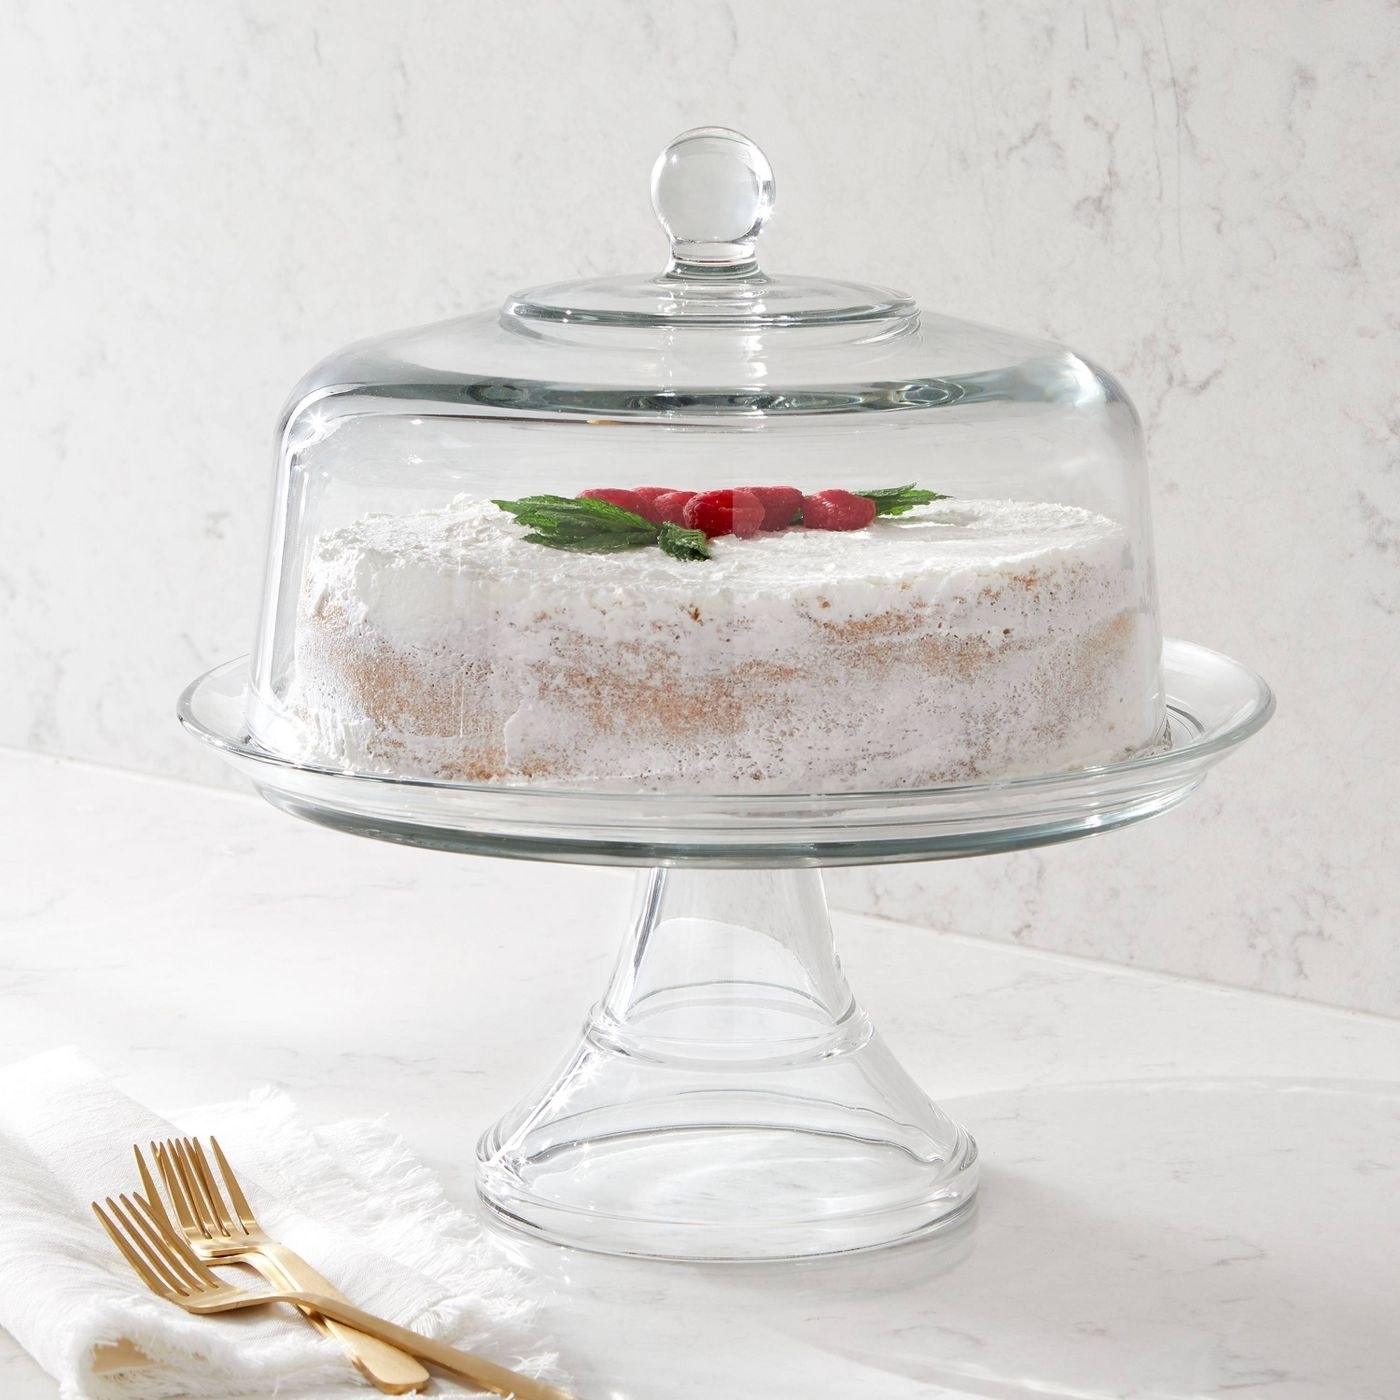 glass cake stand with lid and a cake inside